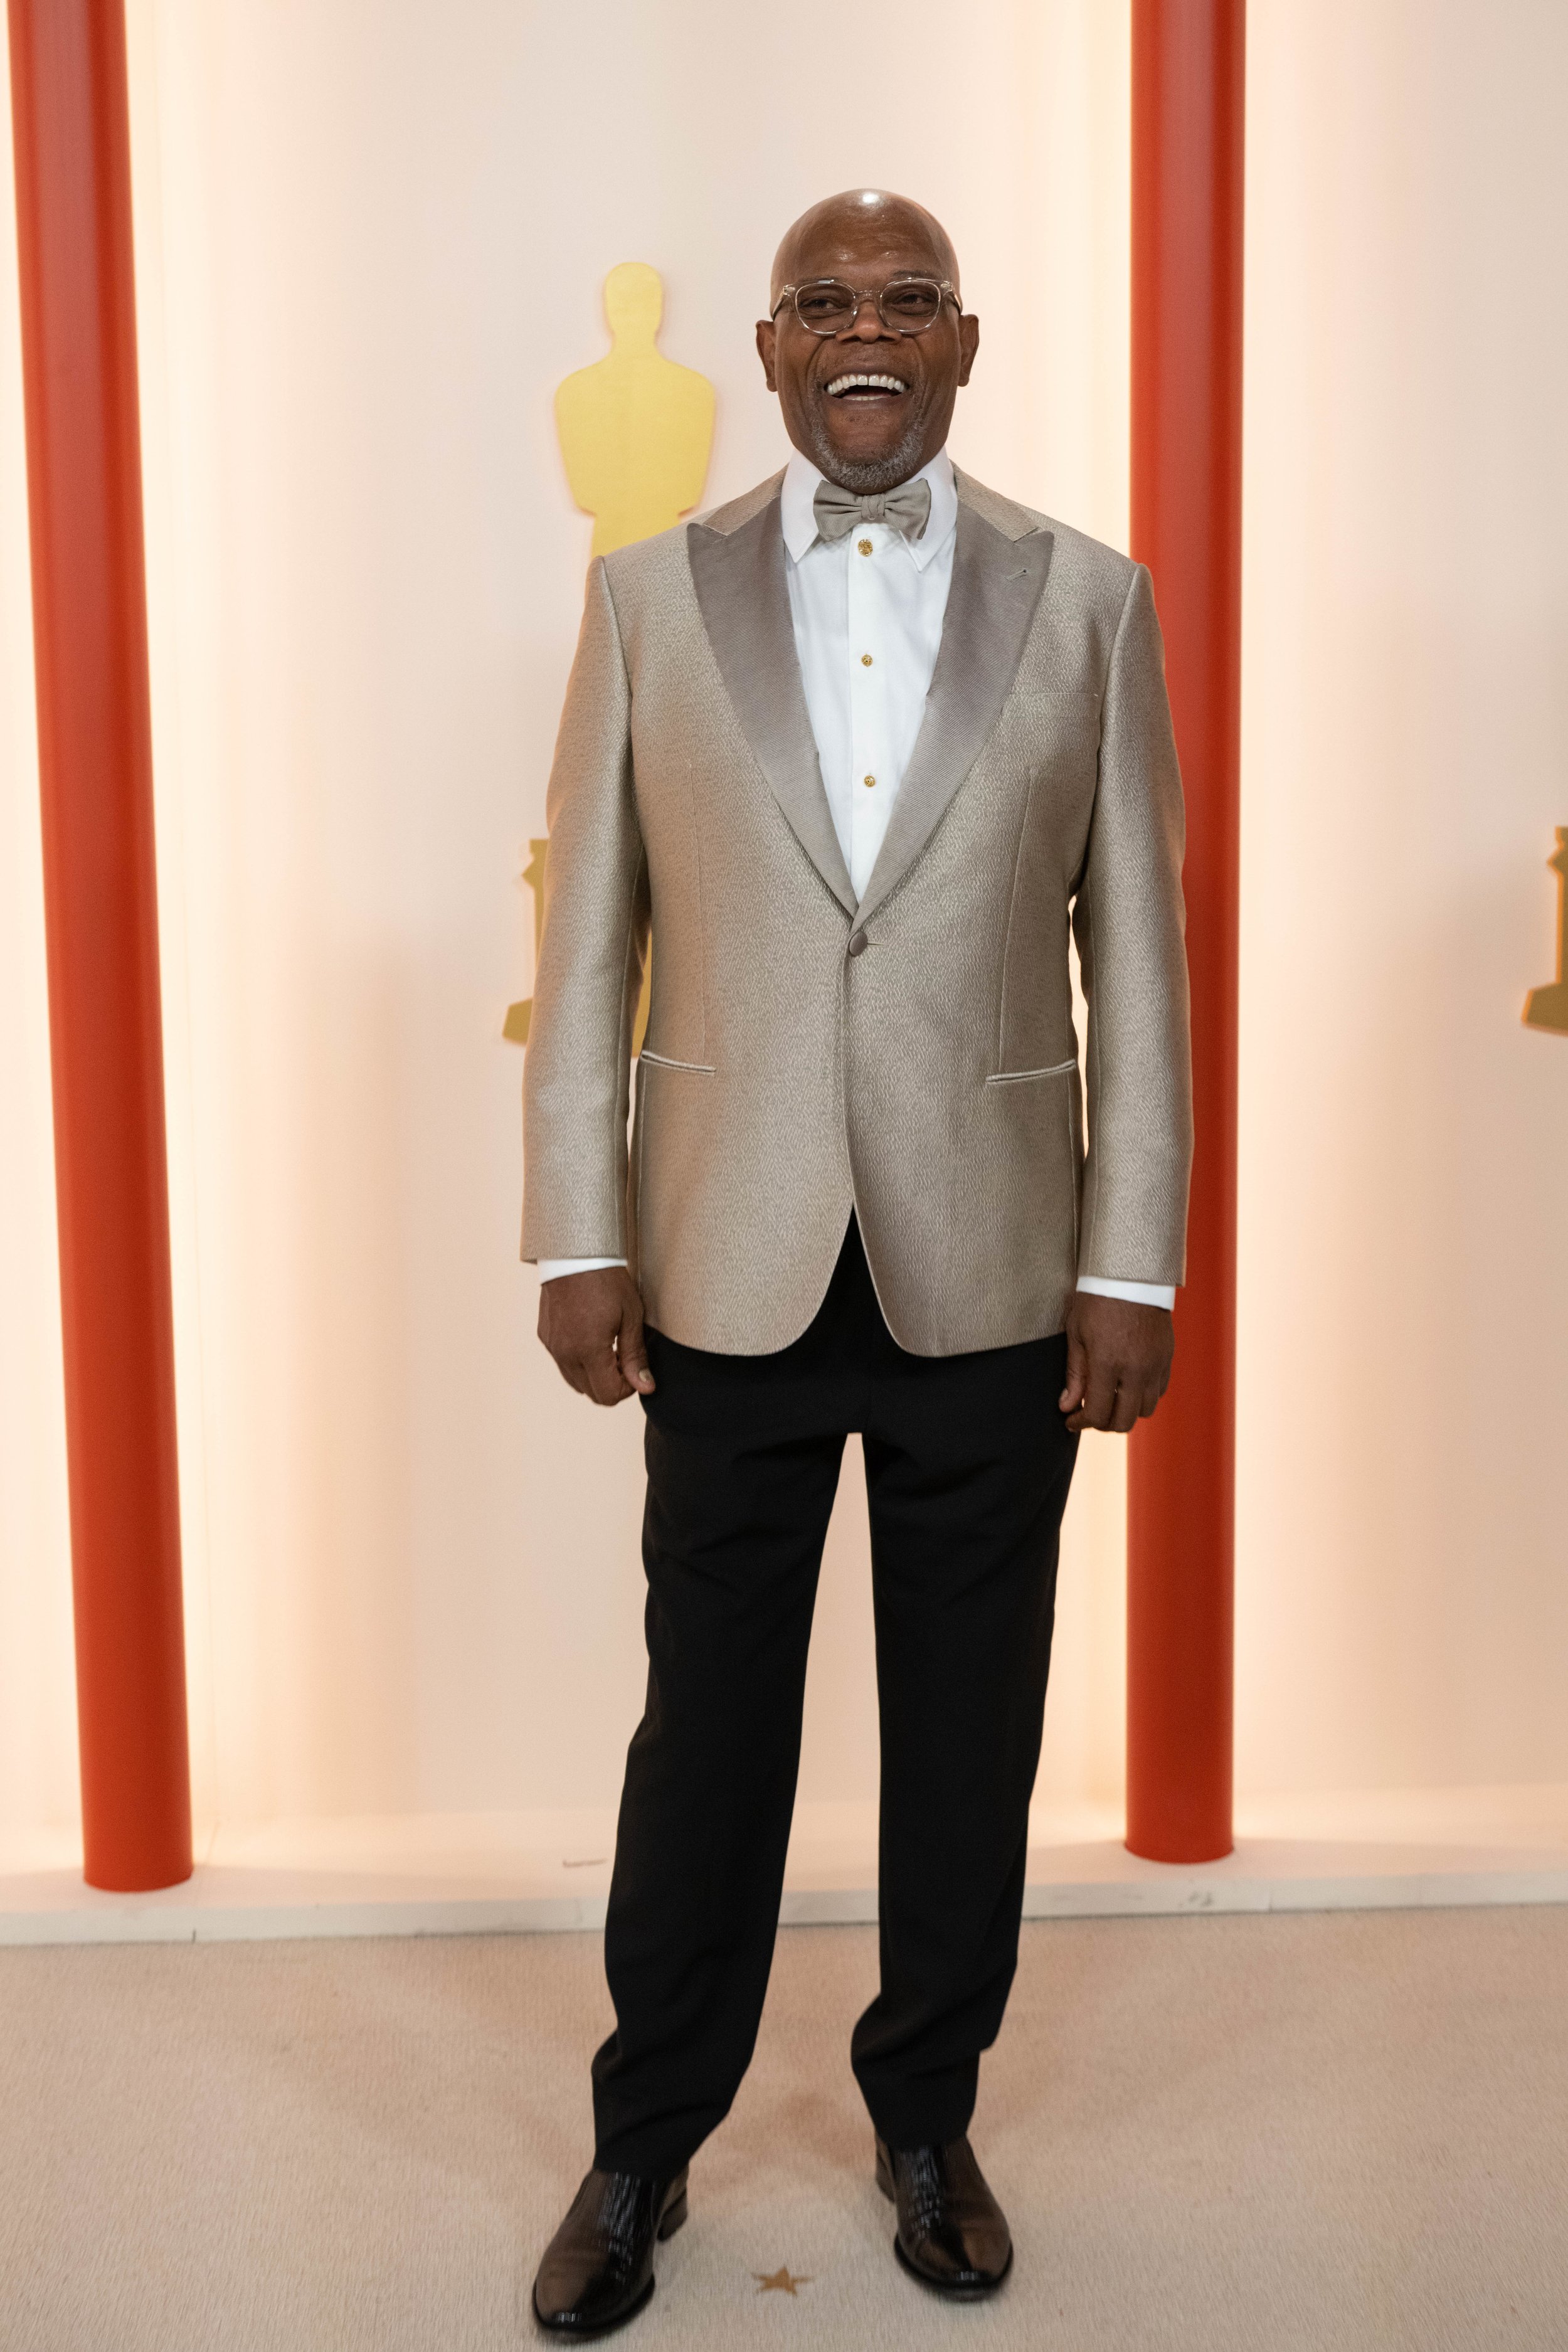 Samuel L. Jackson arrives on the red carpet of the 95th Oscars